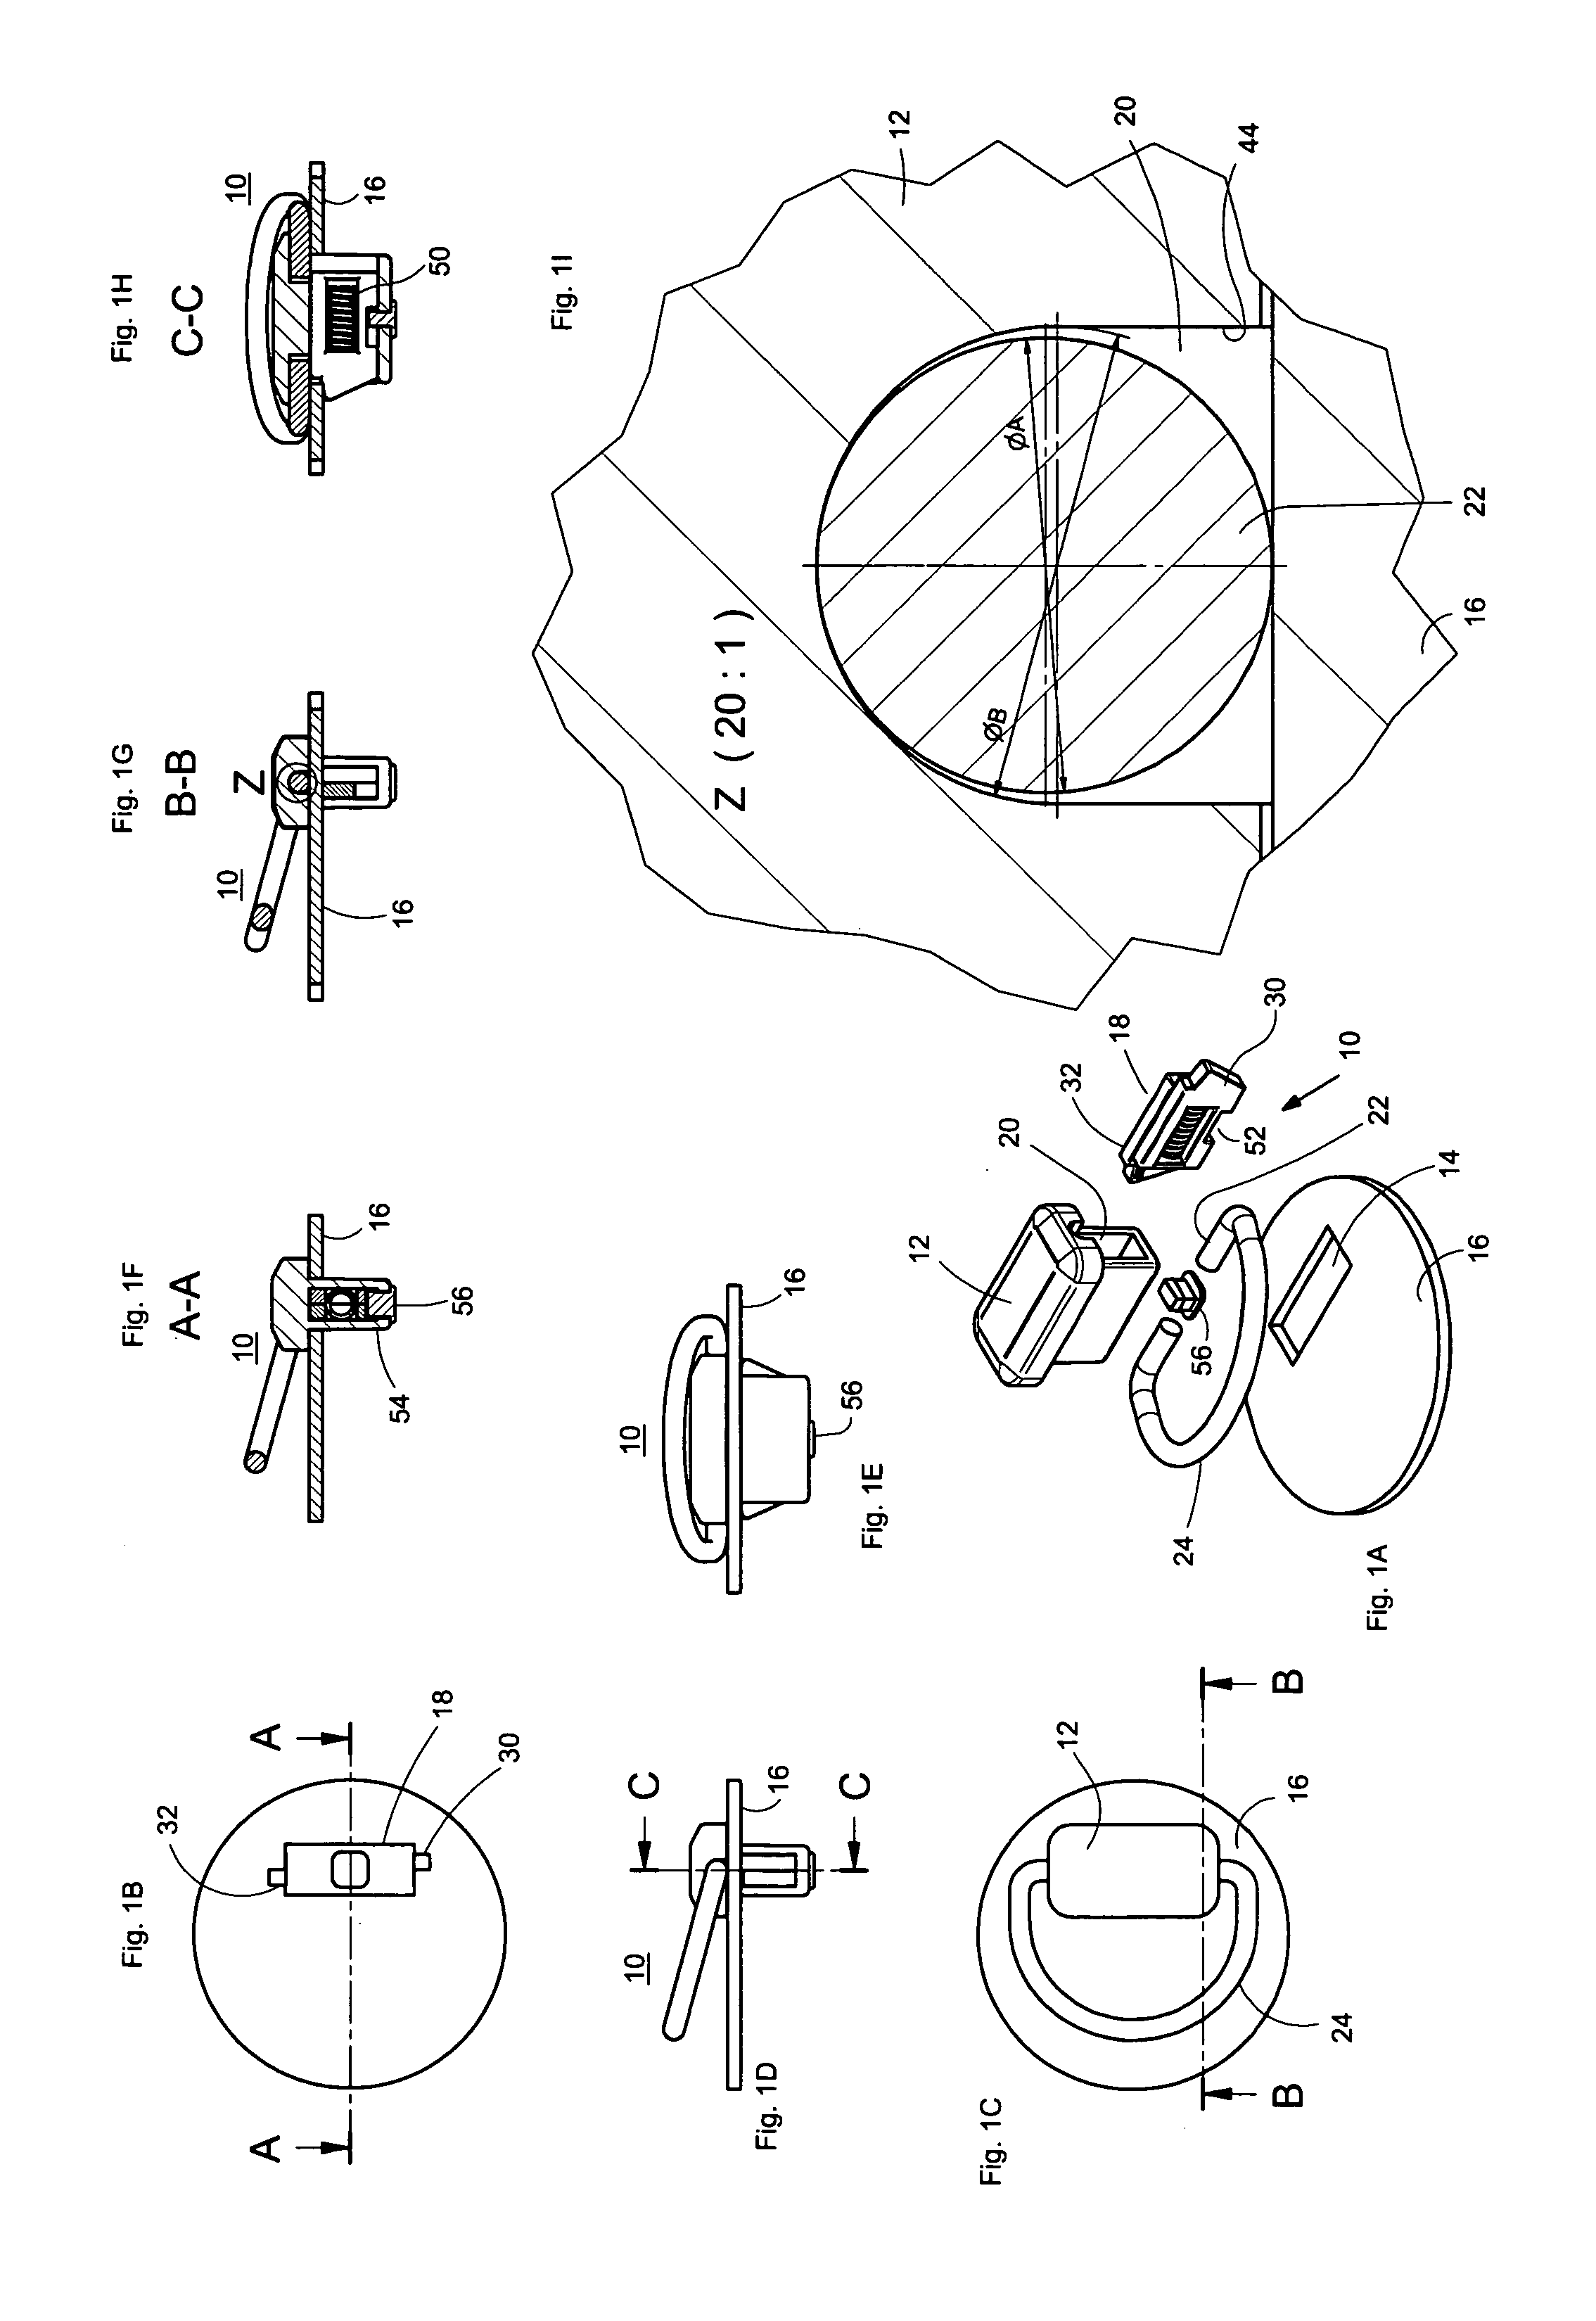 Handle, eye, or clothes hook having a mounting plate and pivot bearing